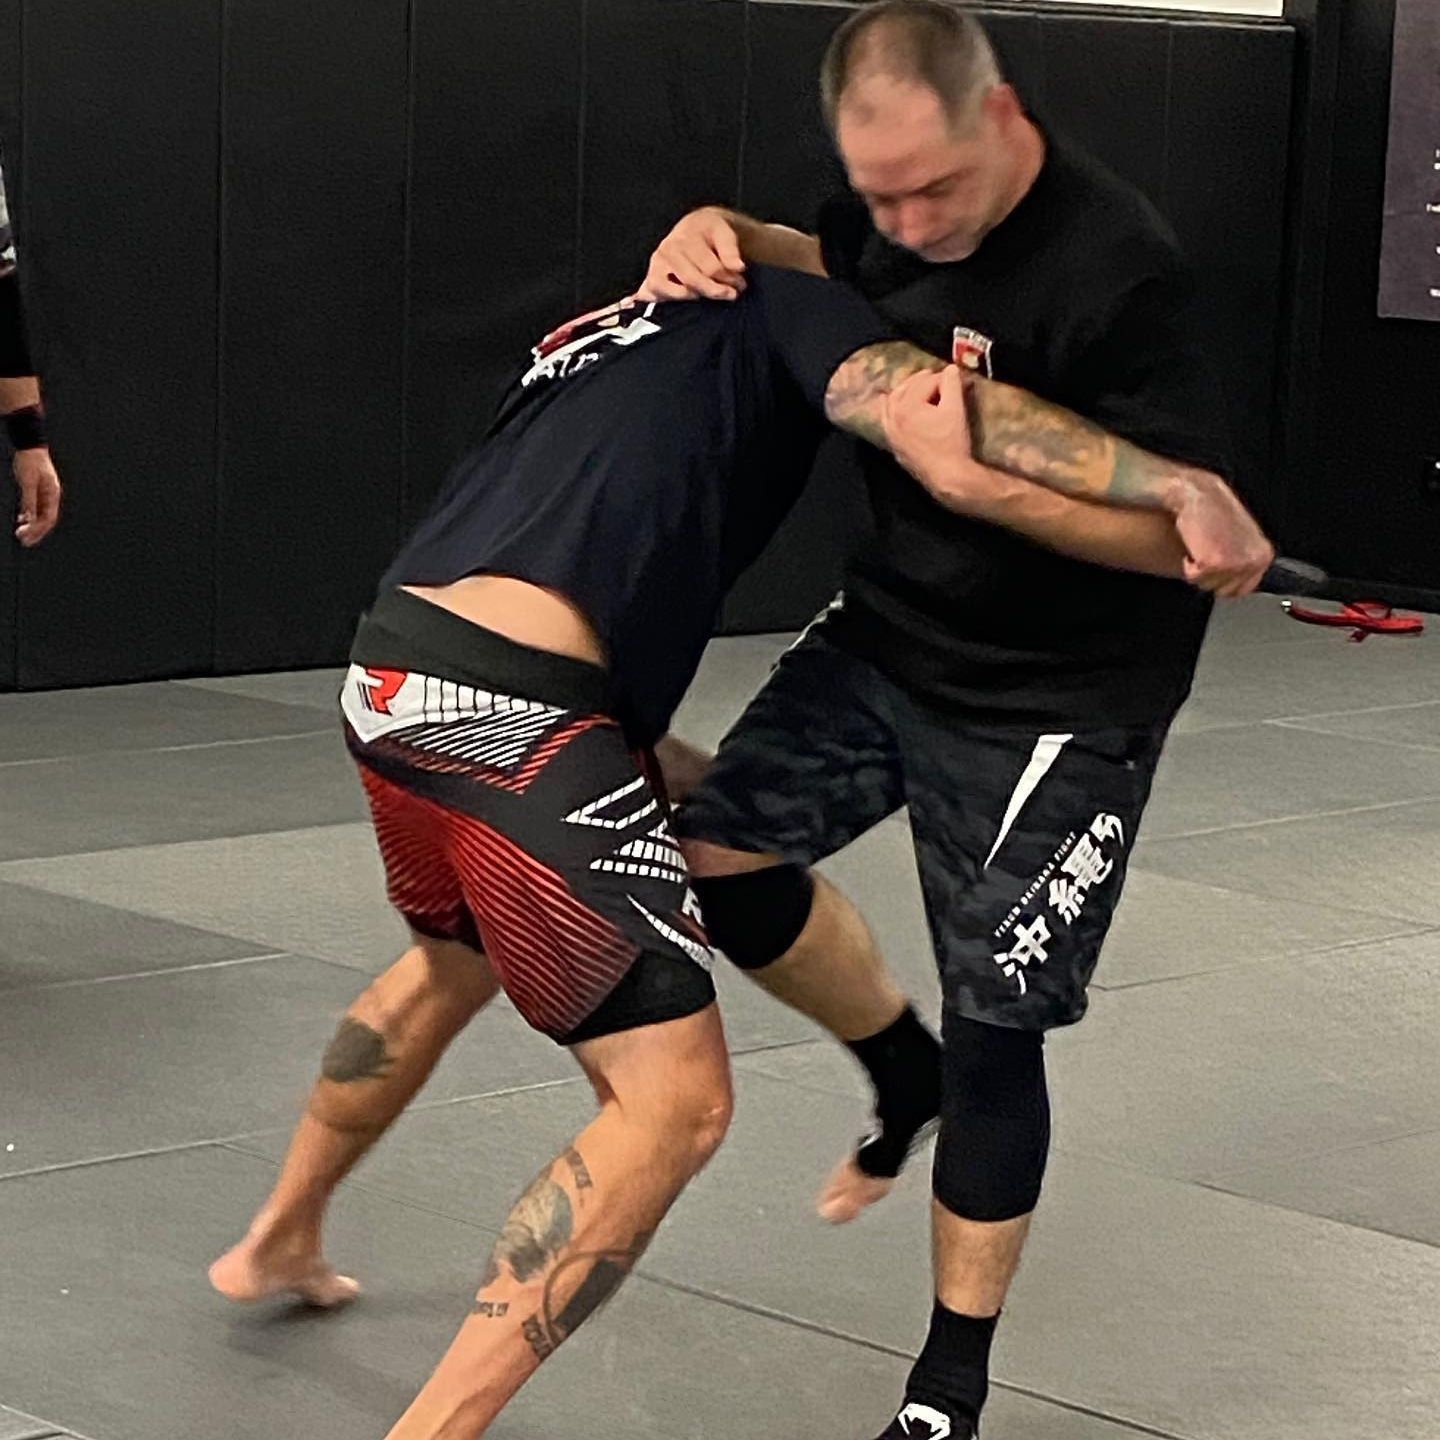 Two men are wrestling in a gym and one has a tattoo on his arm